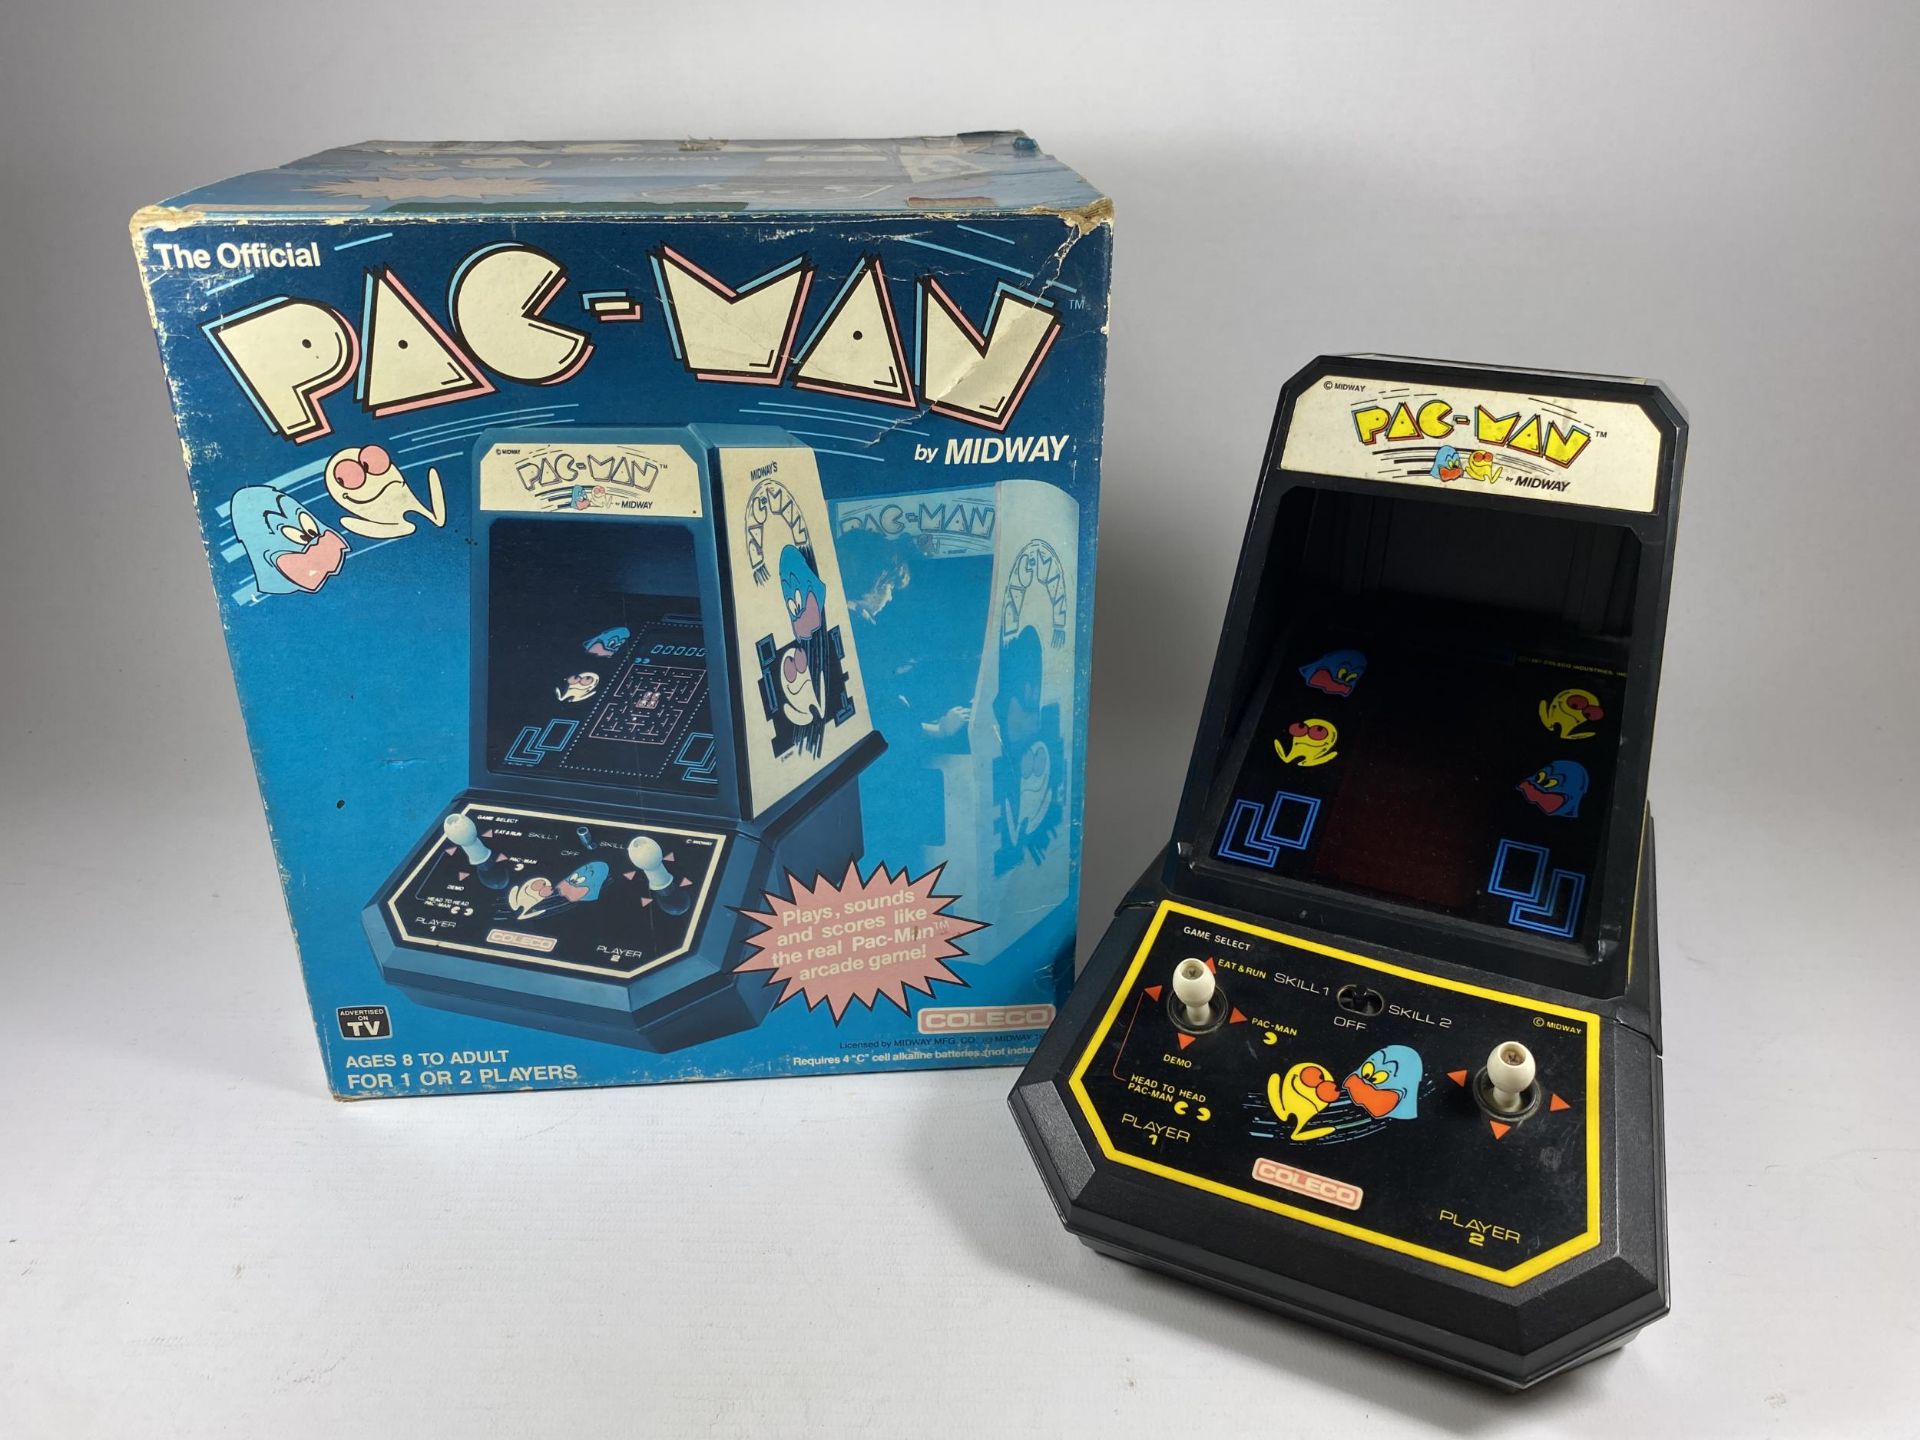 A BOXED RETRO COLECO PAC MAN BY MIDWAY ARCADE GAME